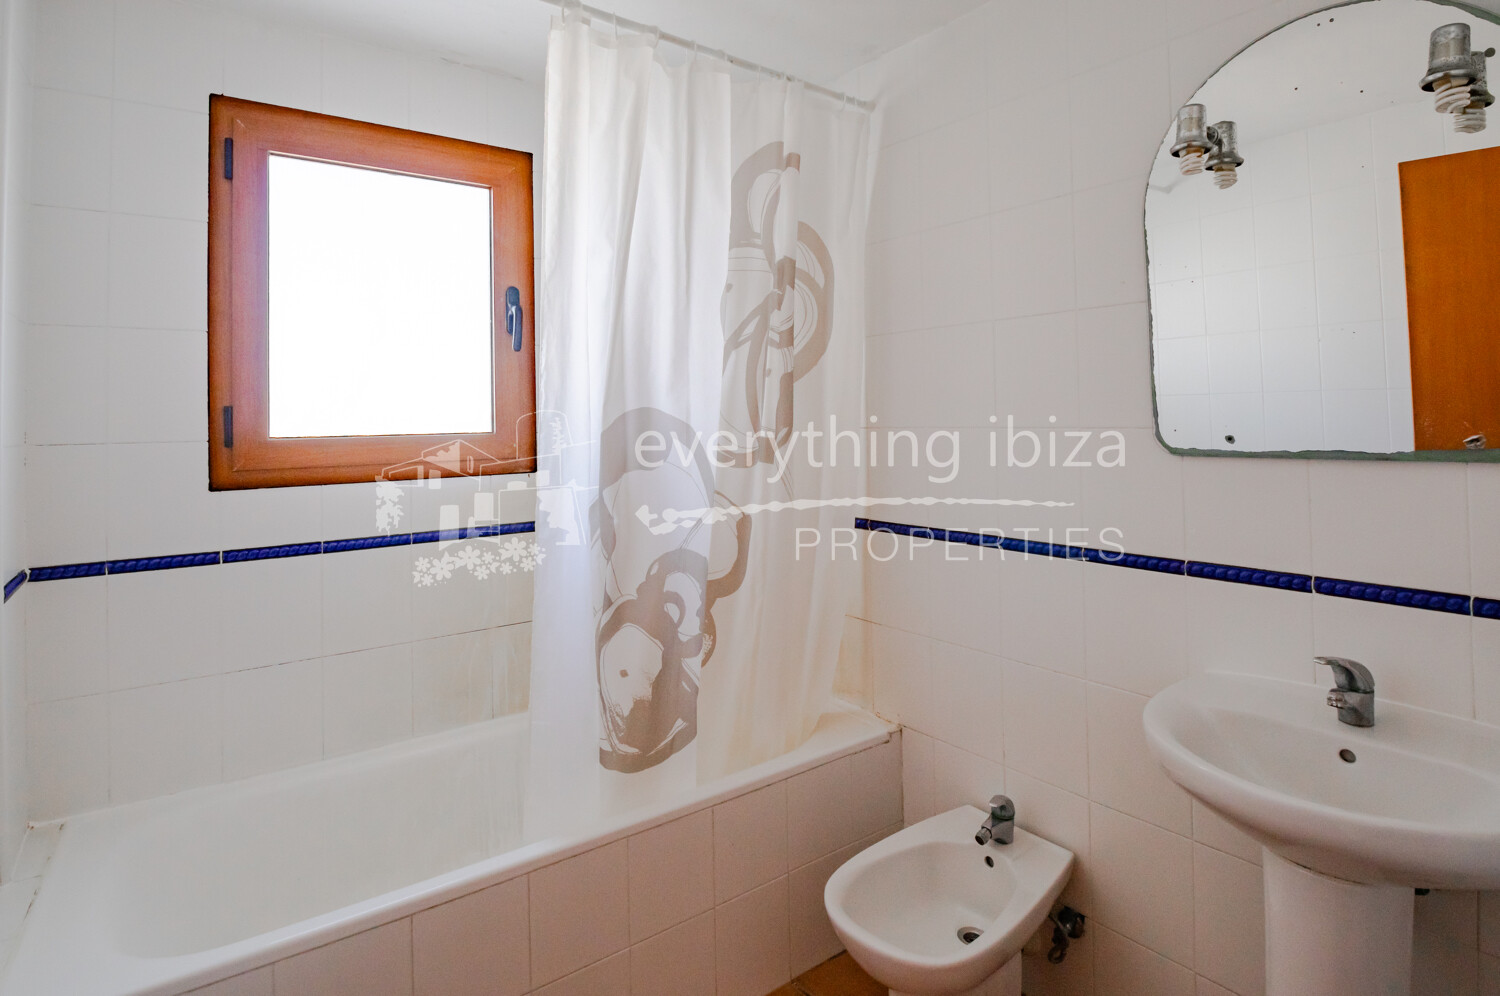 Modernised Apartment in Exclusive Area of Old Ibiza Town Centre, ref. 1652, for sale in Ibiza by everything ibiza Properties